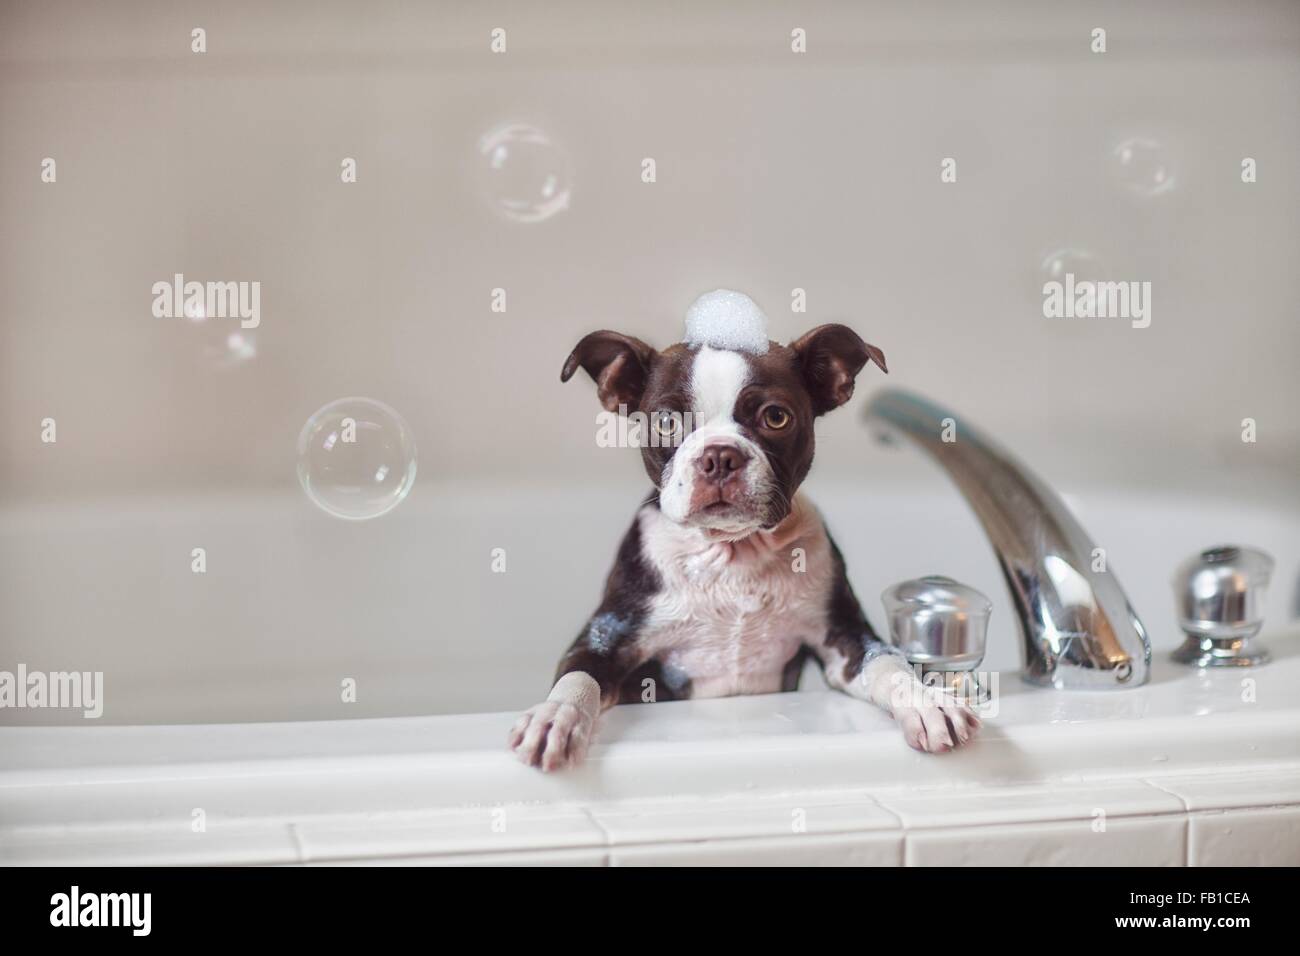 Boston Terrier puppy in bath with soap suds on head, looking at camera Stock Photo